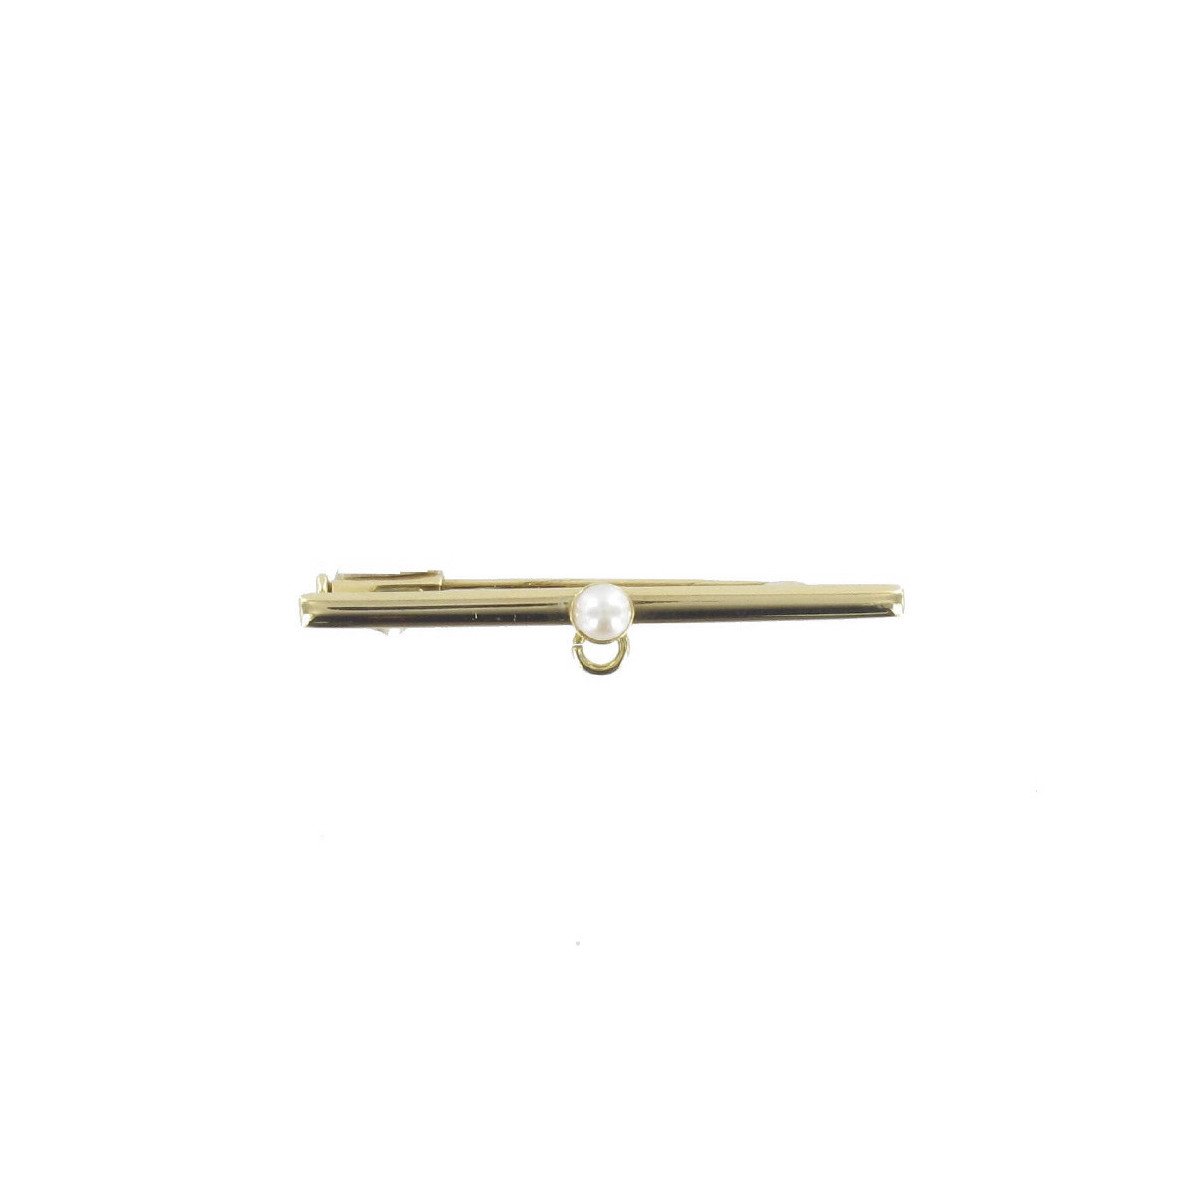 GOLD MEDAL NEEDLE WITH PEARL